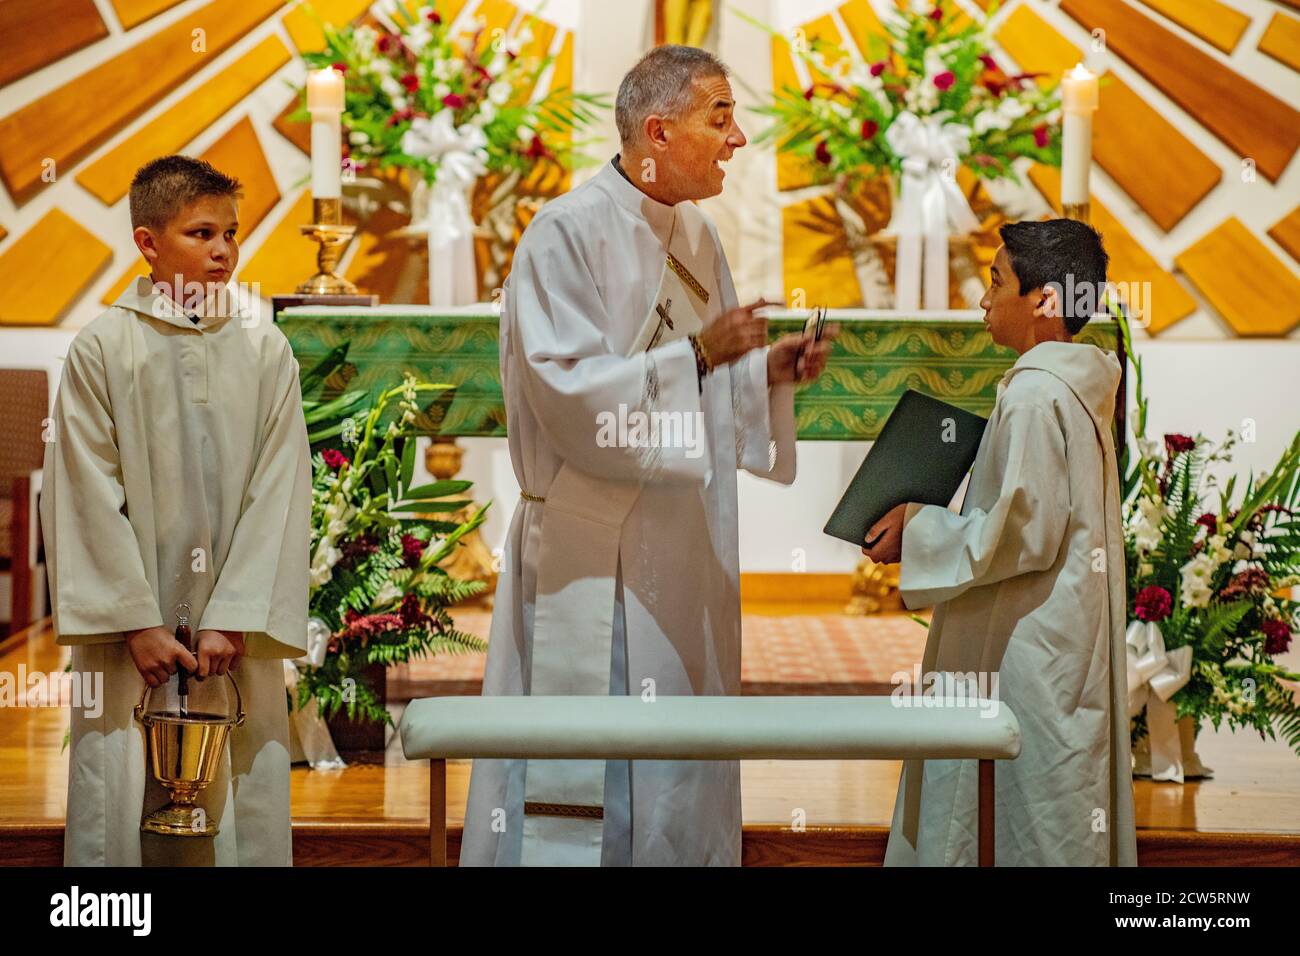 At a Southern California Catholic church, a robed deacon with a picture sash converses with two young boy altar assistant before celebrating a mass. Stock Photo